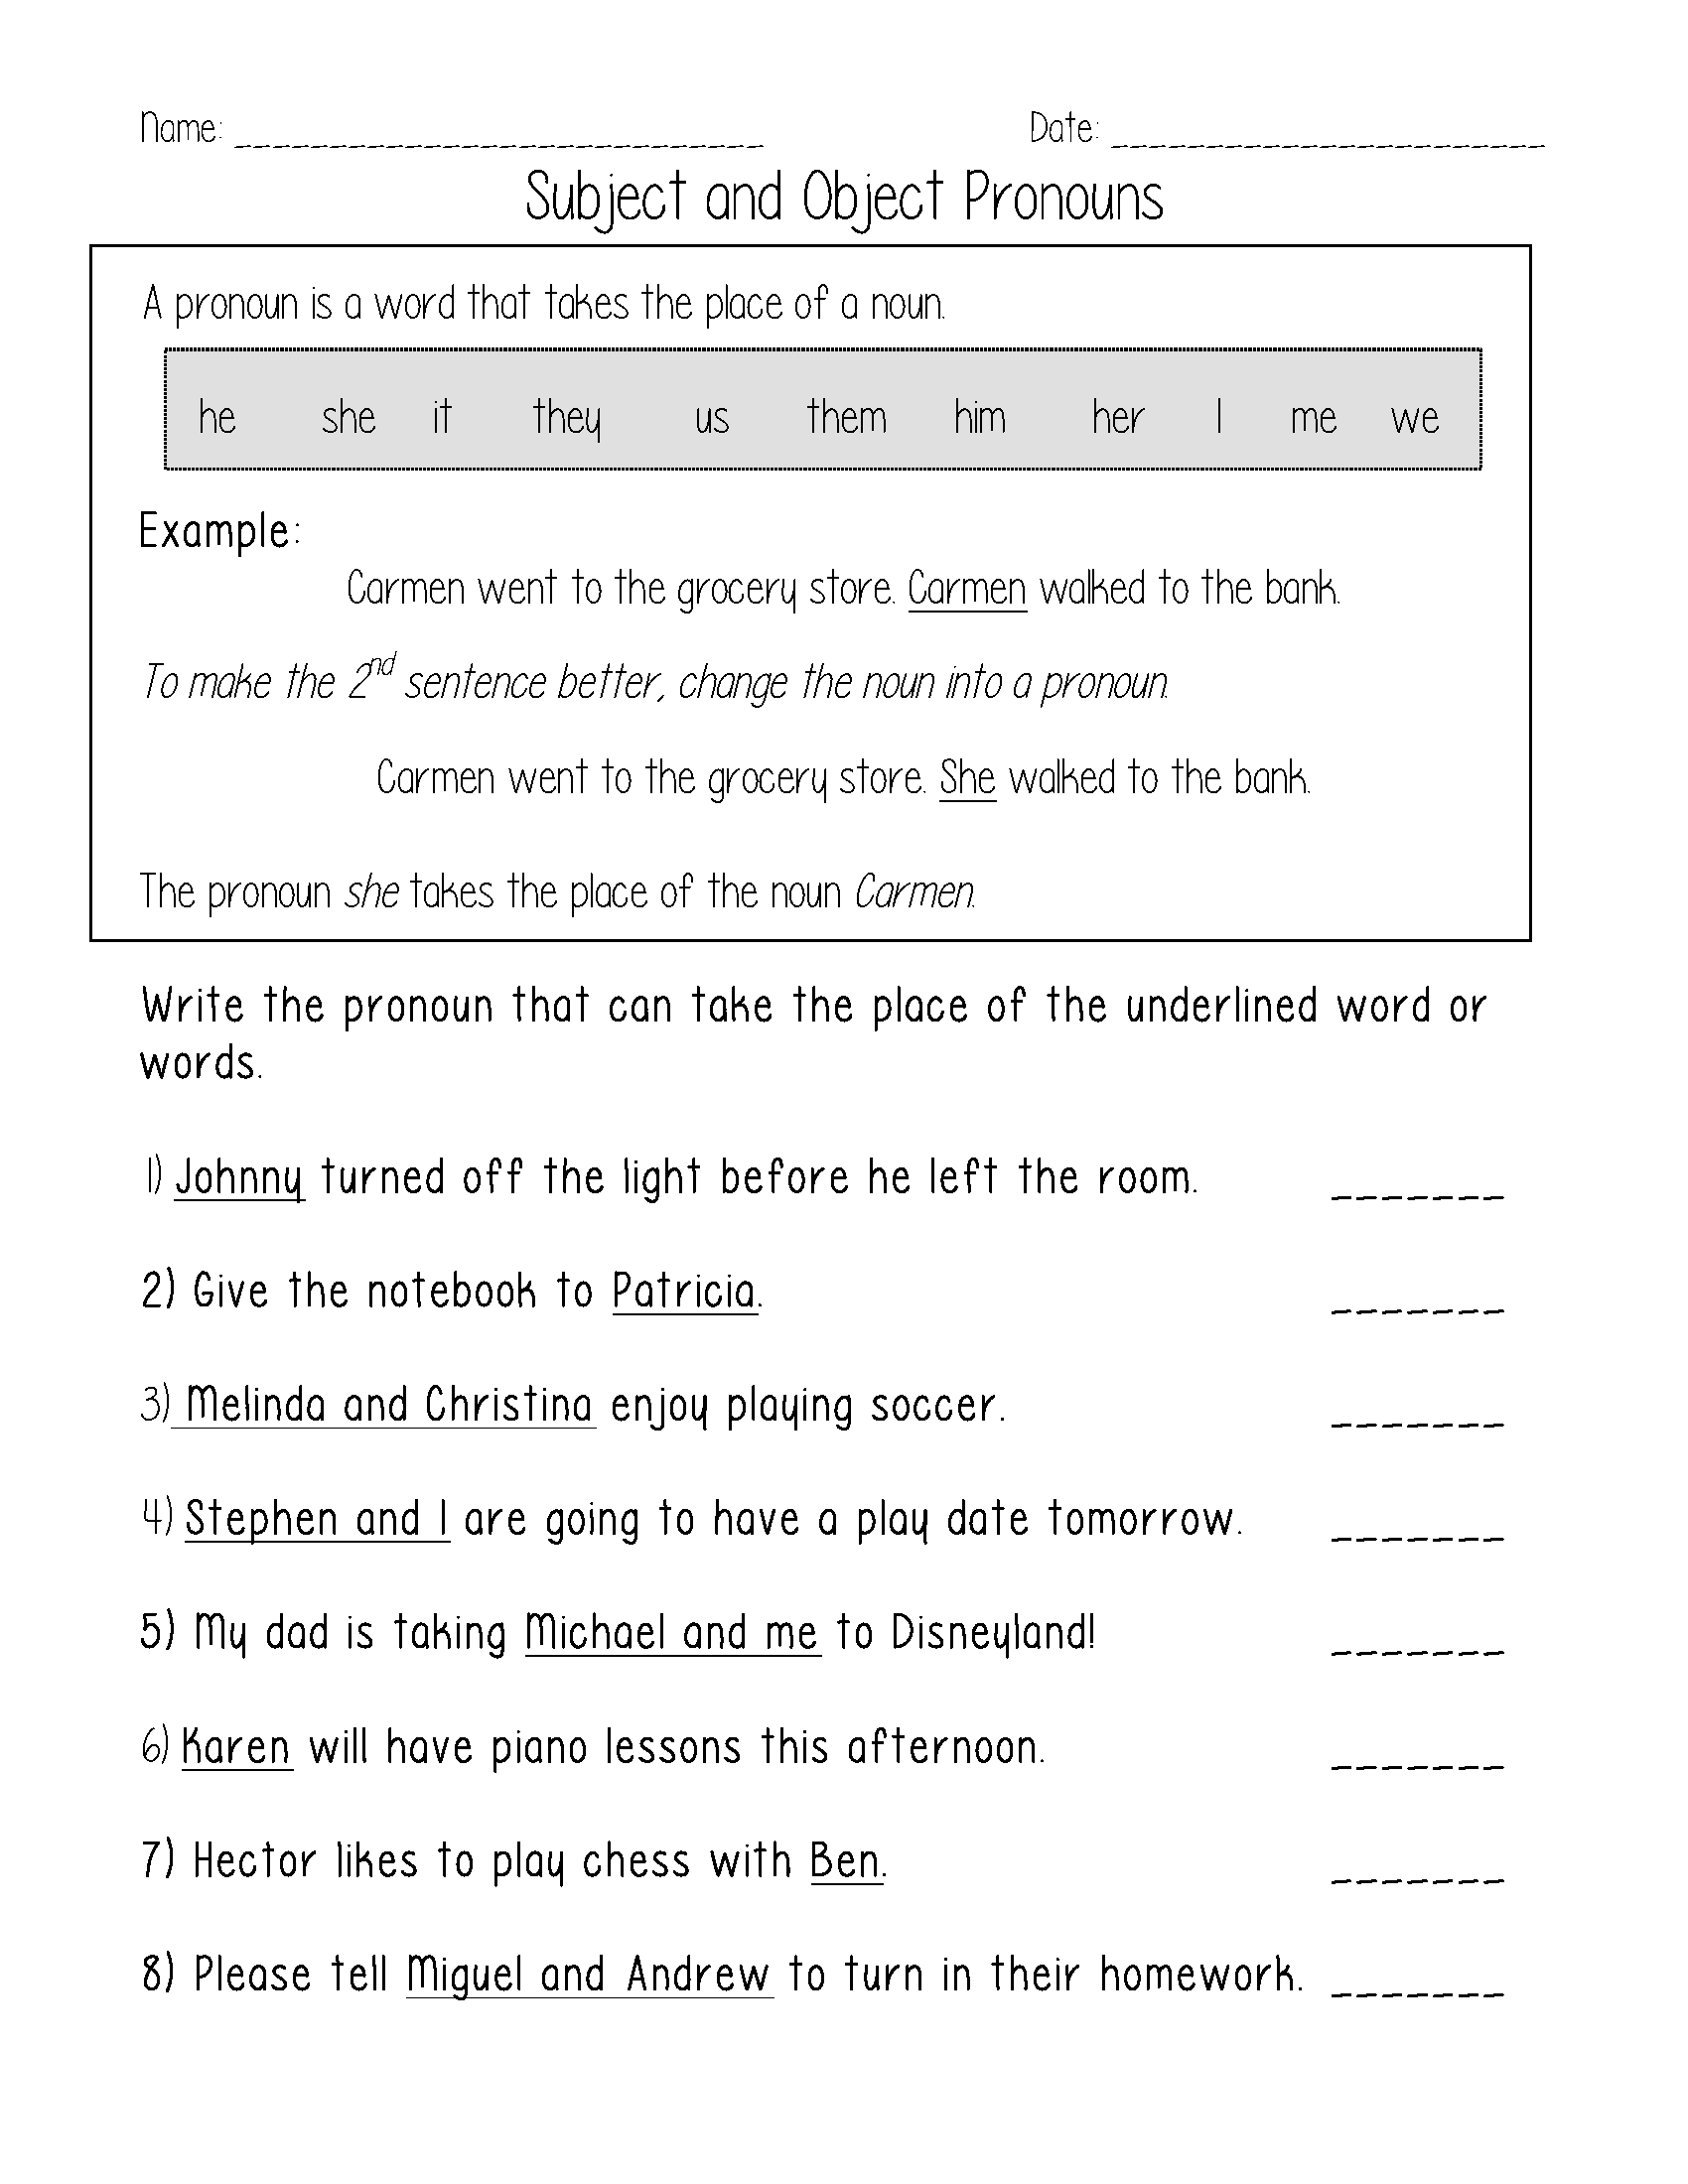 Pronouns Worksheets | Subject And Object Pronouns Worksheets - Free Printable Pronoun Worksheets For 2Nd Grade